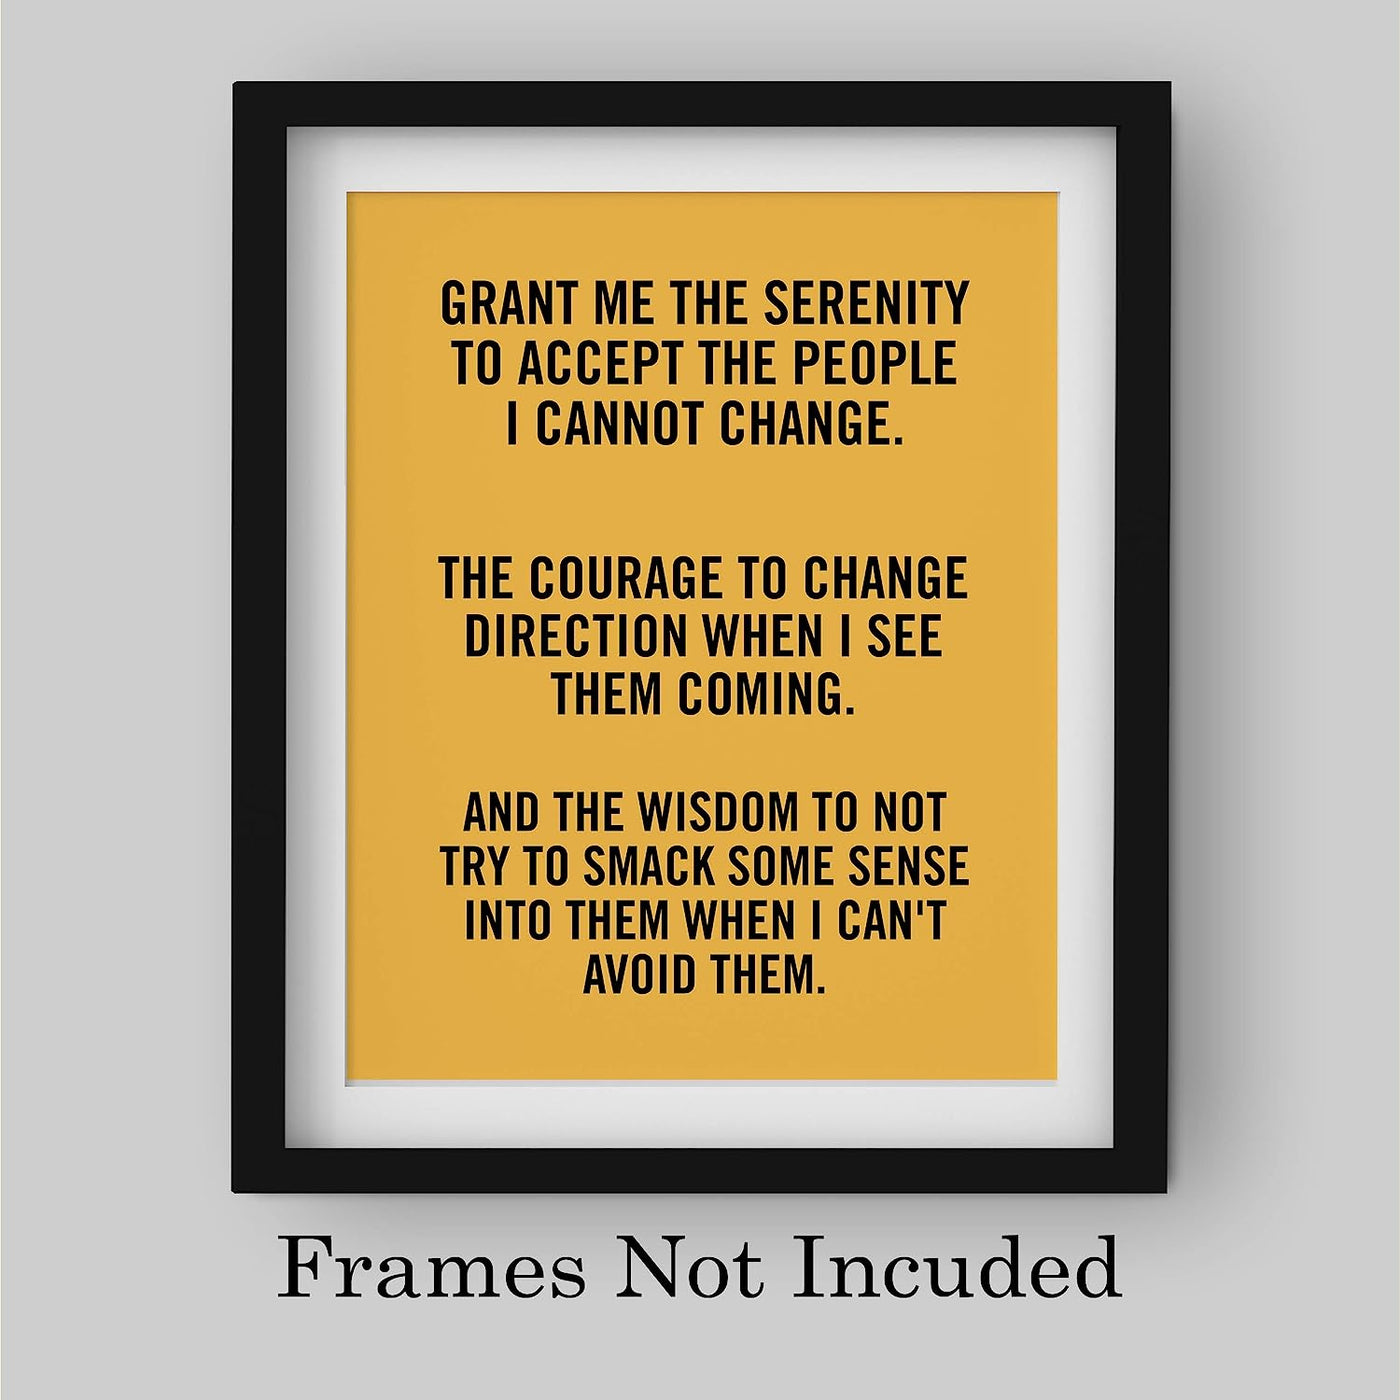 Grant Me the Wisdom to Not Smack Them Funny Wall Art -8 x 10" Sarcastic Print-Ready to Frame. Modern Typographic Design. Humorous Home-Office-Bar-Shop-Cave Decor. Great Novelty Sign-Fun Gift!